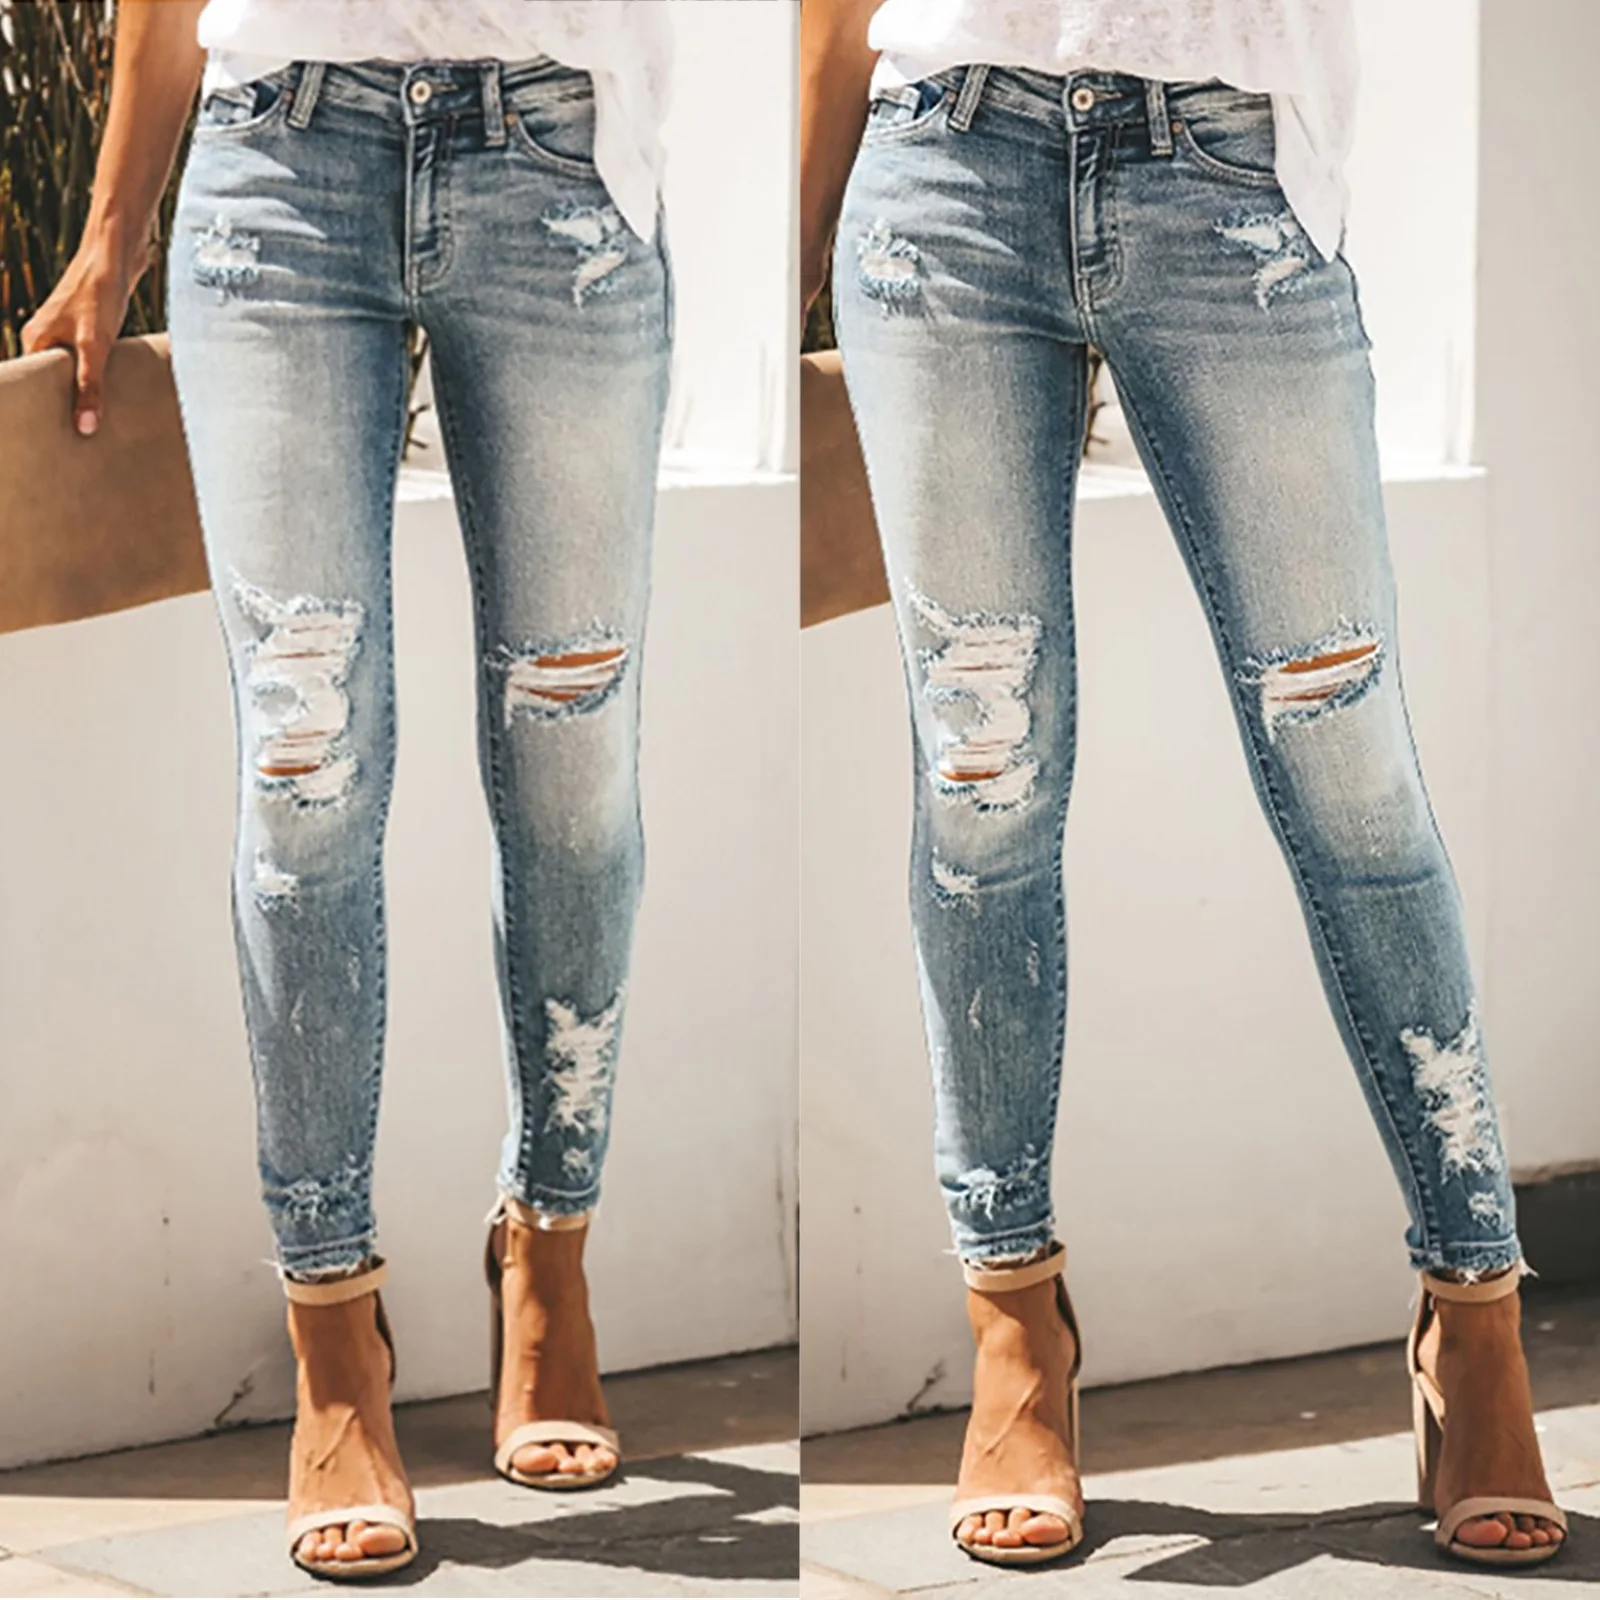 

Women Mom Jeans Ripped Denim Pants Skinny Stretchy Pencil Pants High Waist Jegging Trouser Casual Legging Women Clothing Fashion